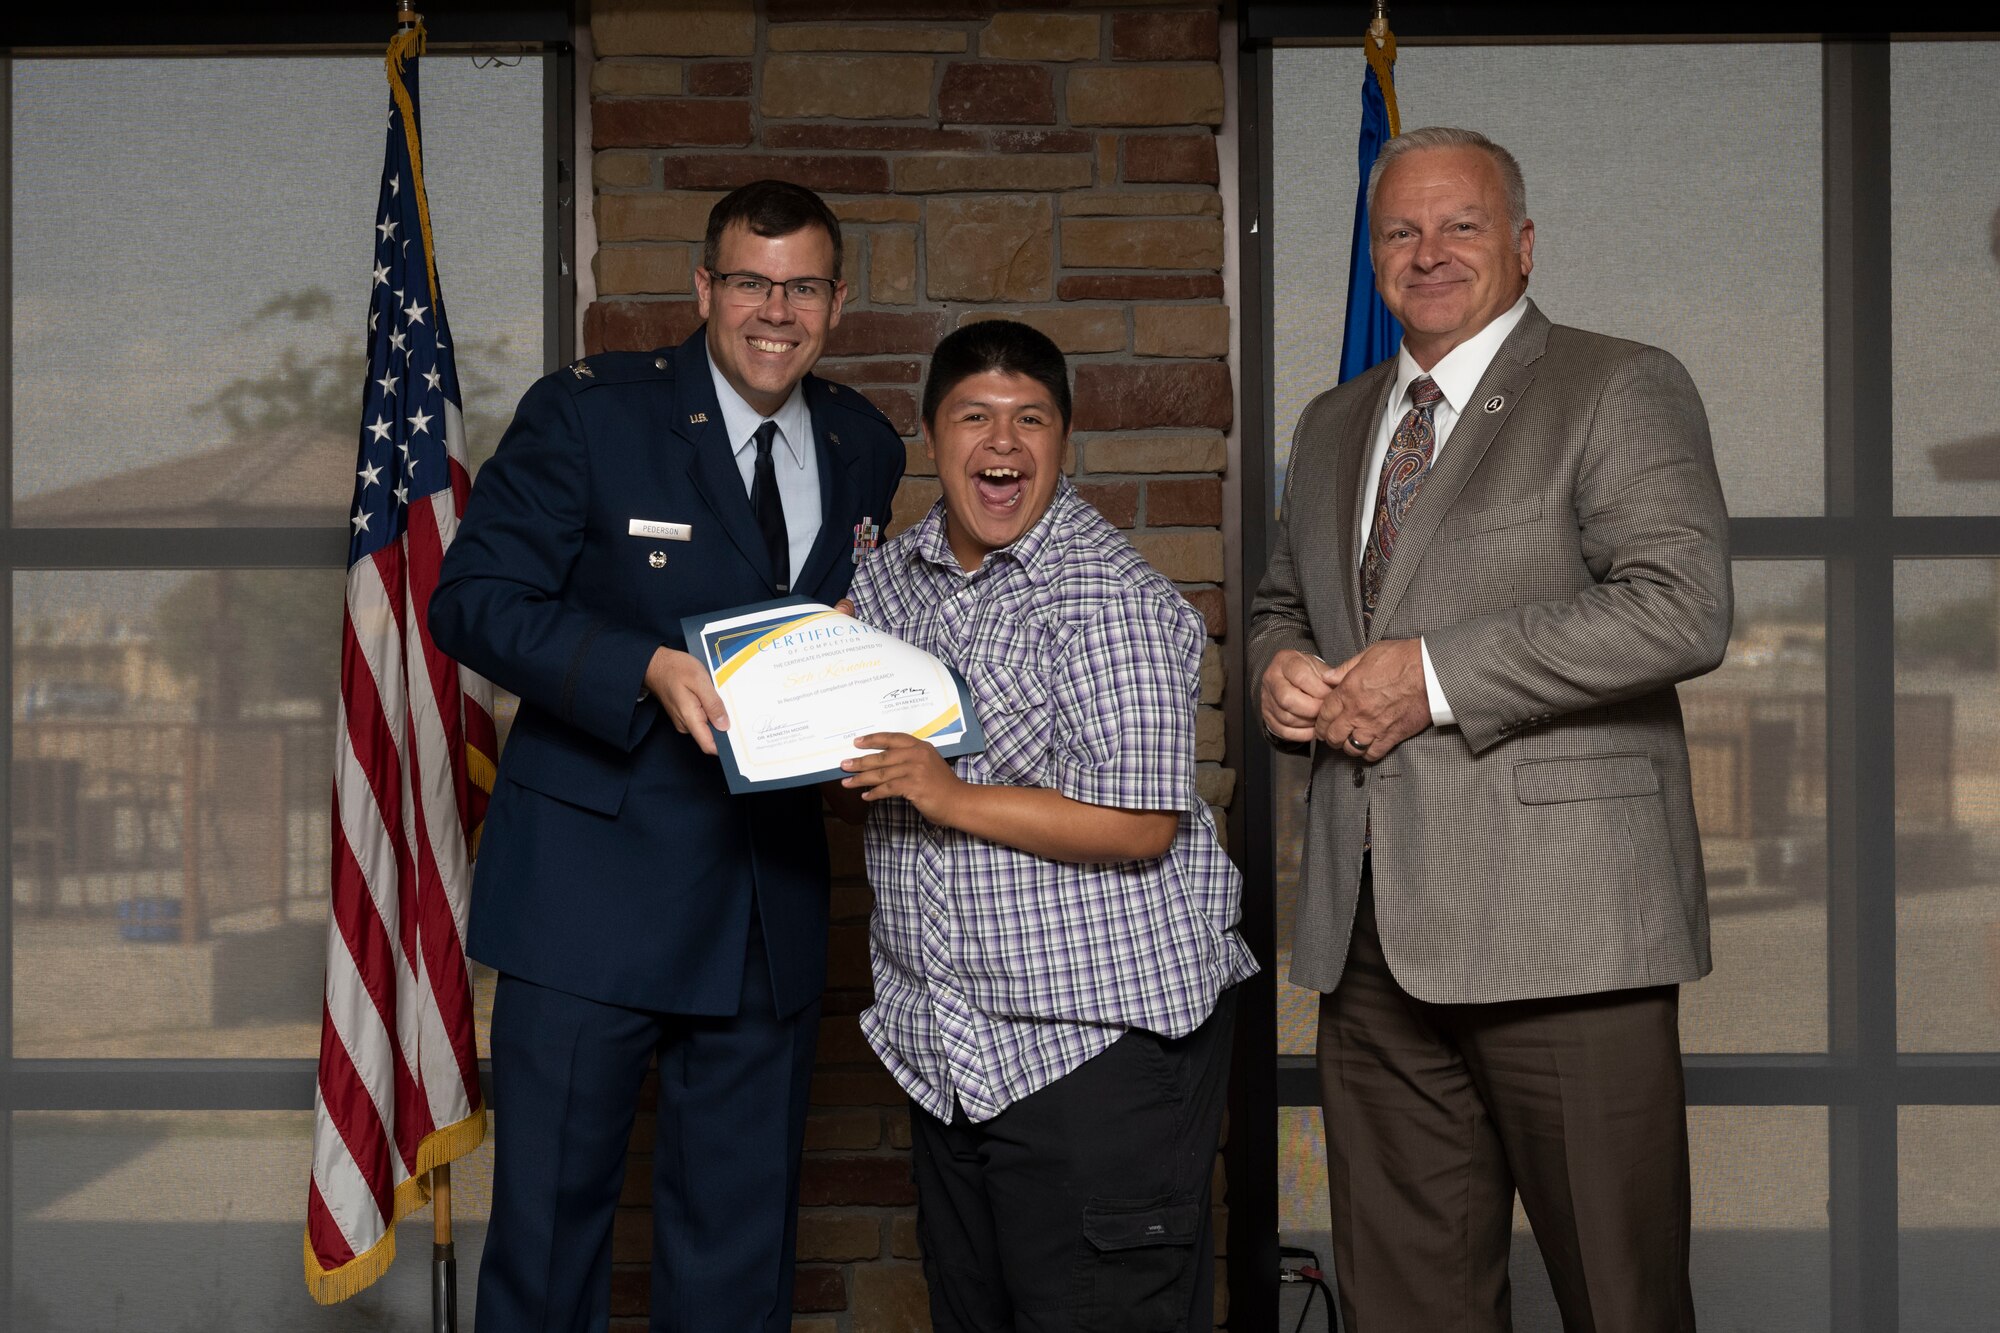 Seth Kernohan, Project SEARCH intern, receives graduation certificate, May 24, 2022, on Holloman Air Force Base, New Mexico.